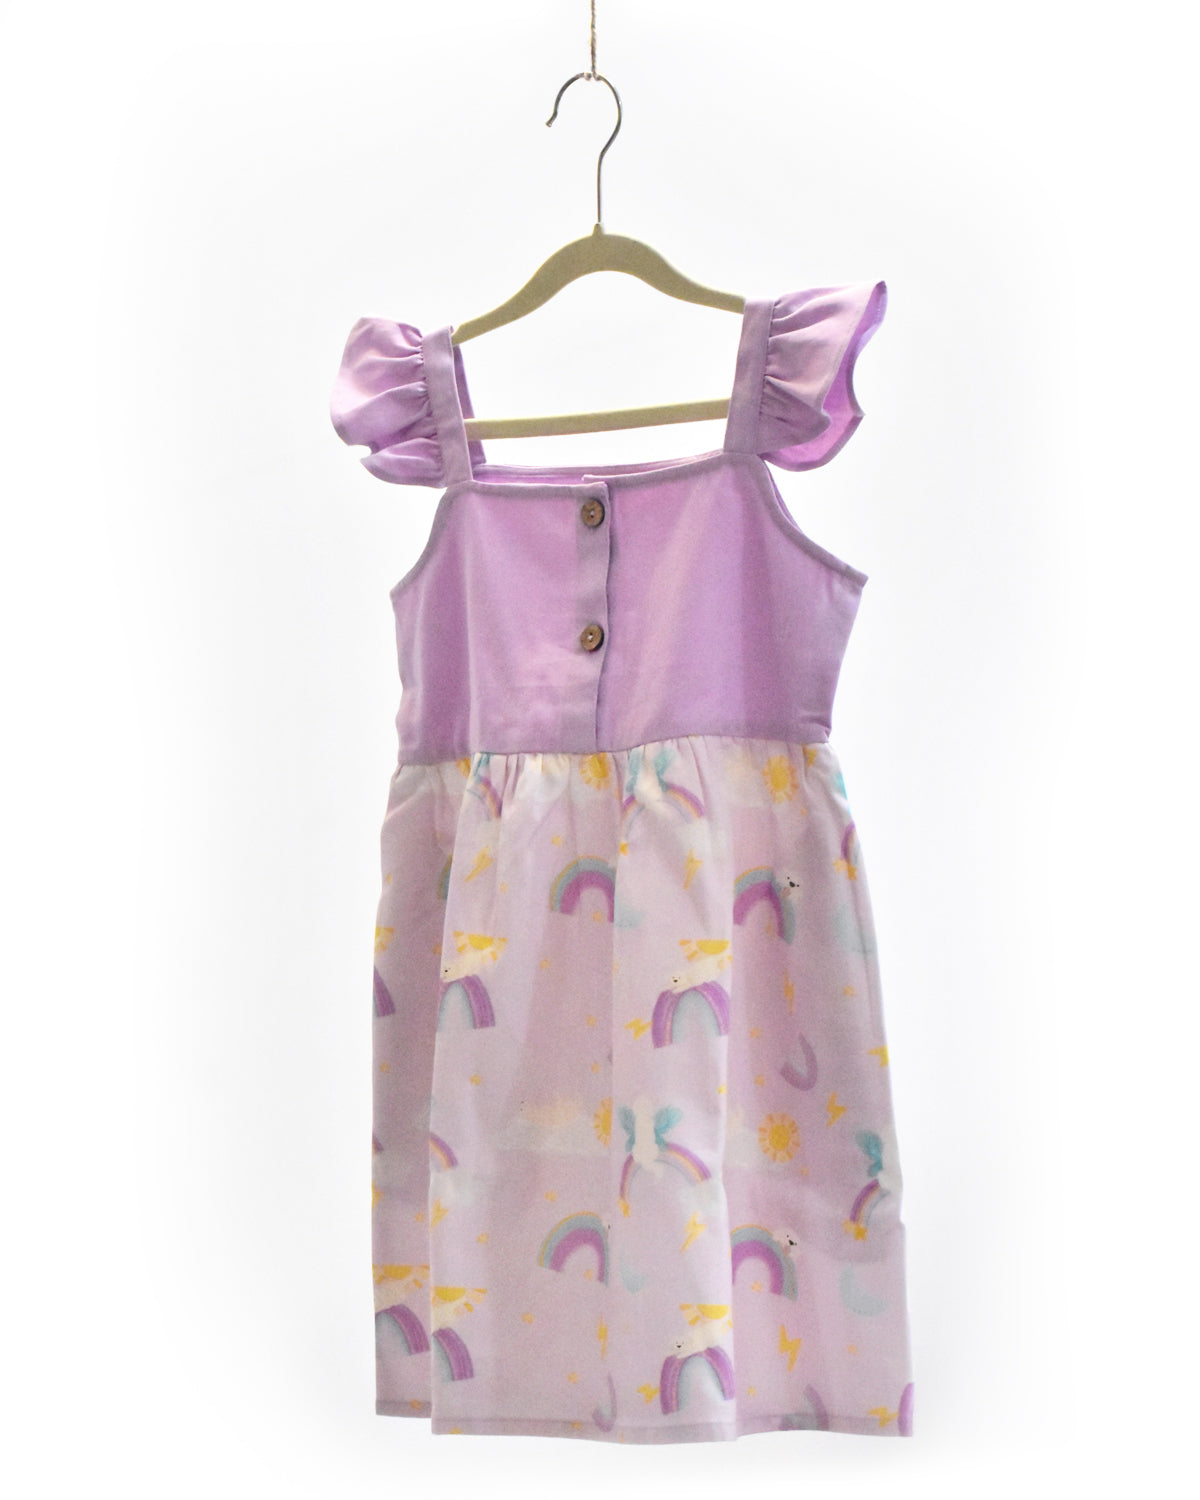 'In the Sky' Lavender Frilly Frock | Rescue